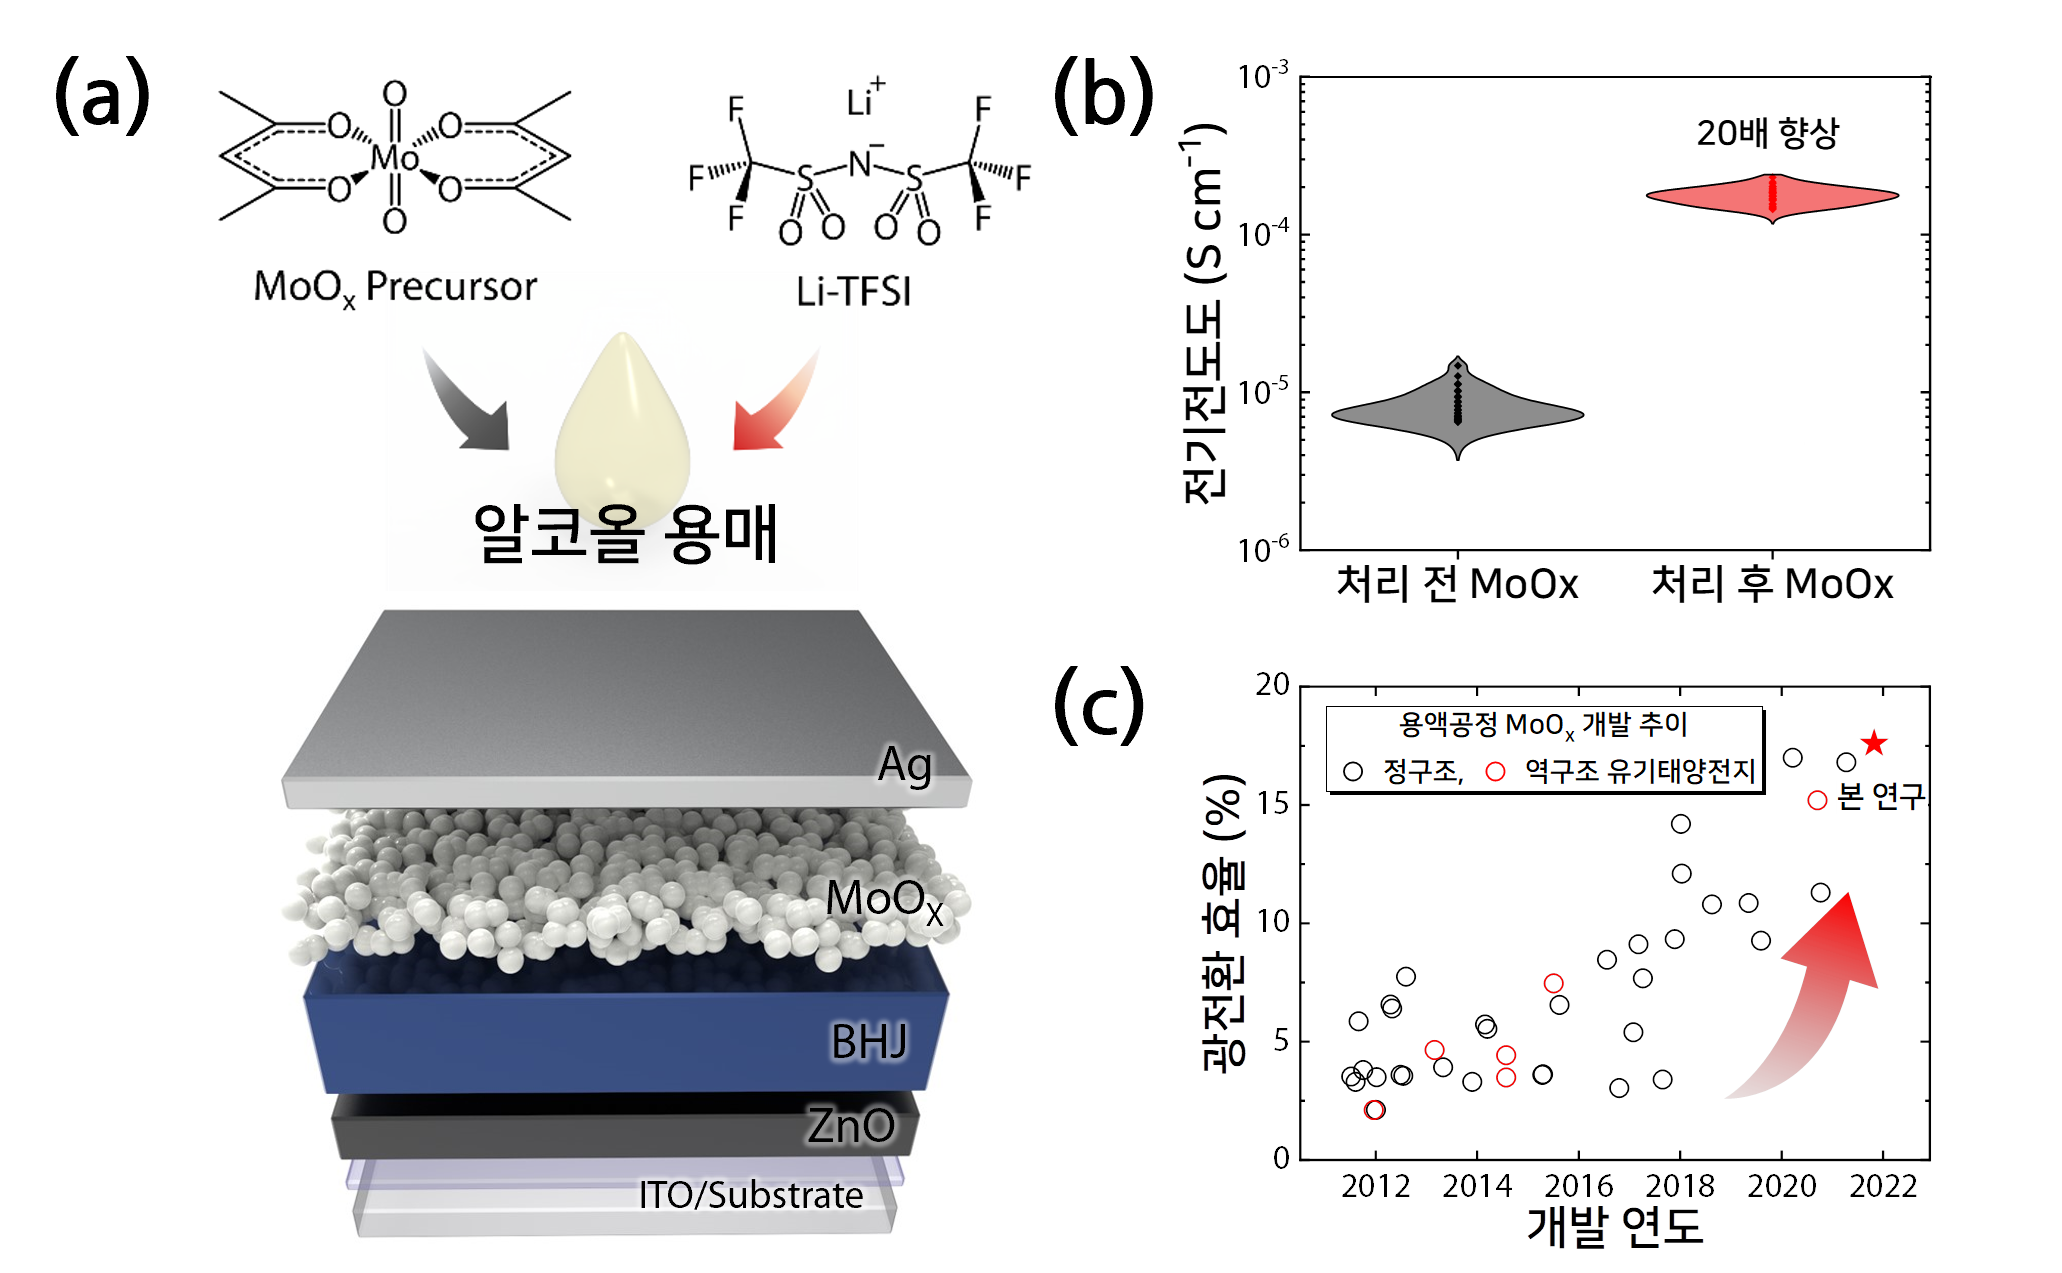 Professor Kwanghee Lee's joint research team improves the efficiency of organic solar cells by 10% at room temperature without heat treatment 이미지